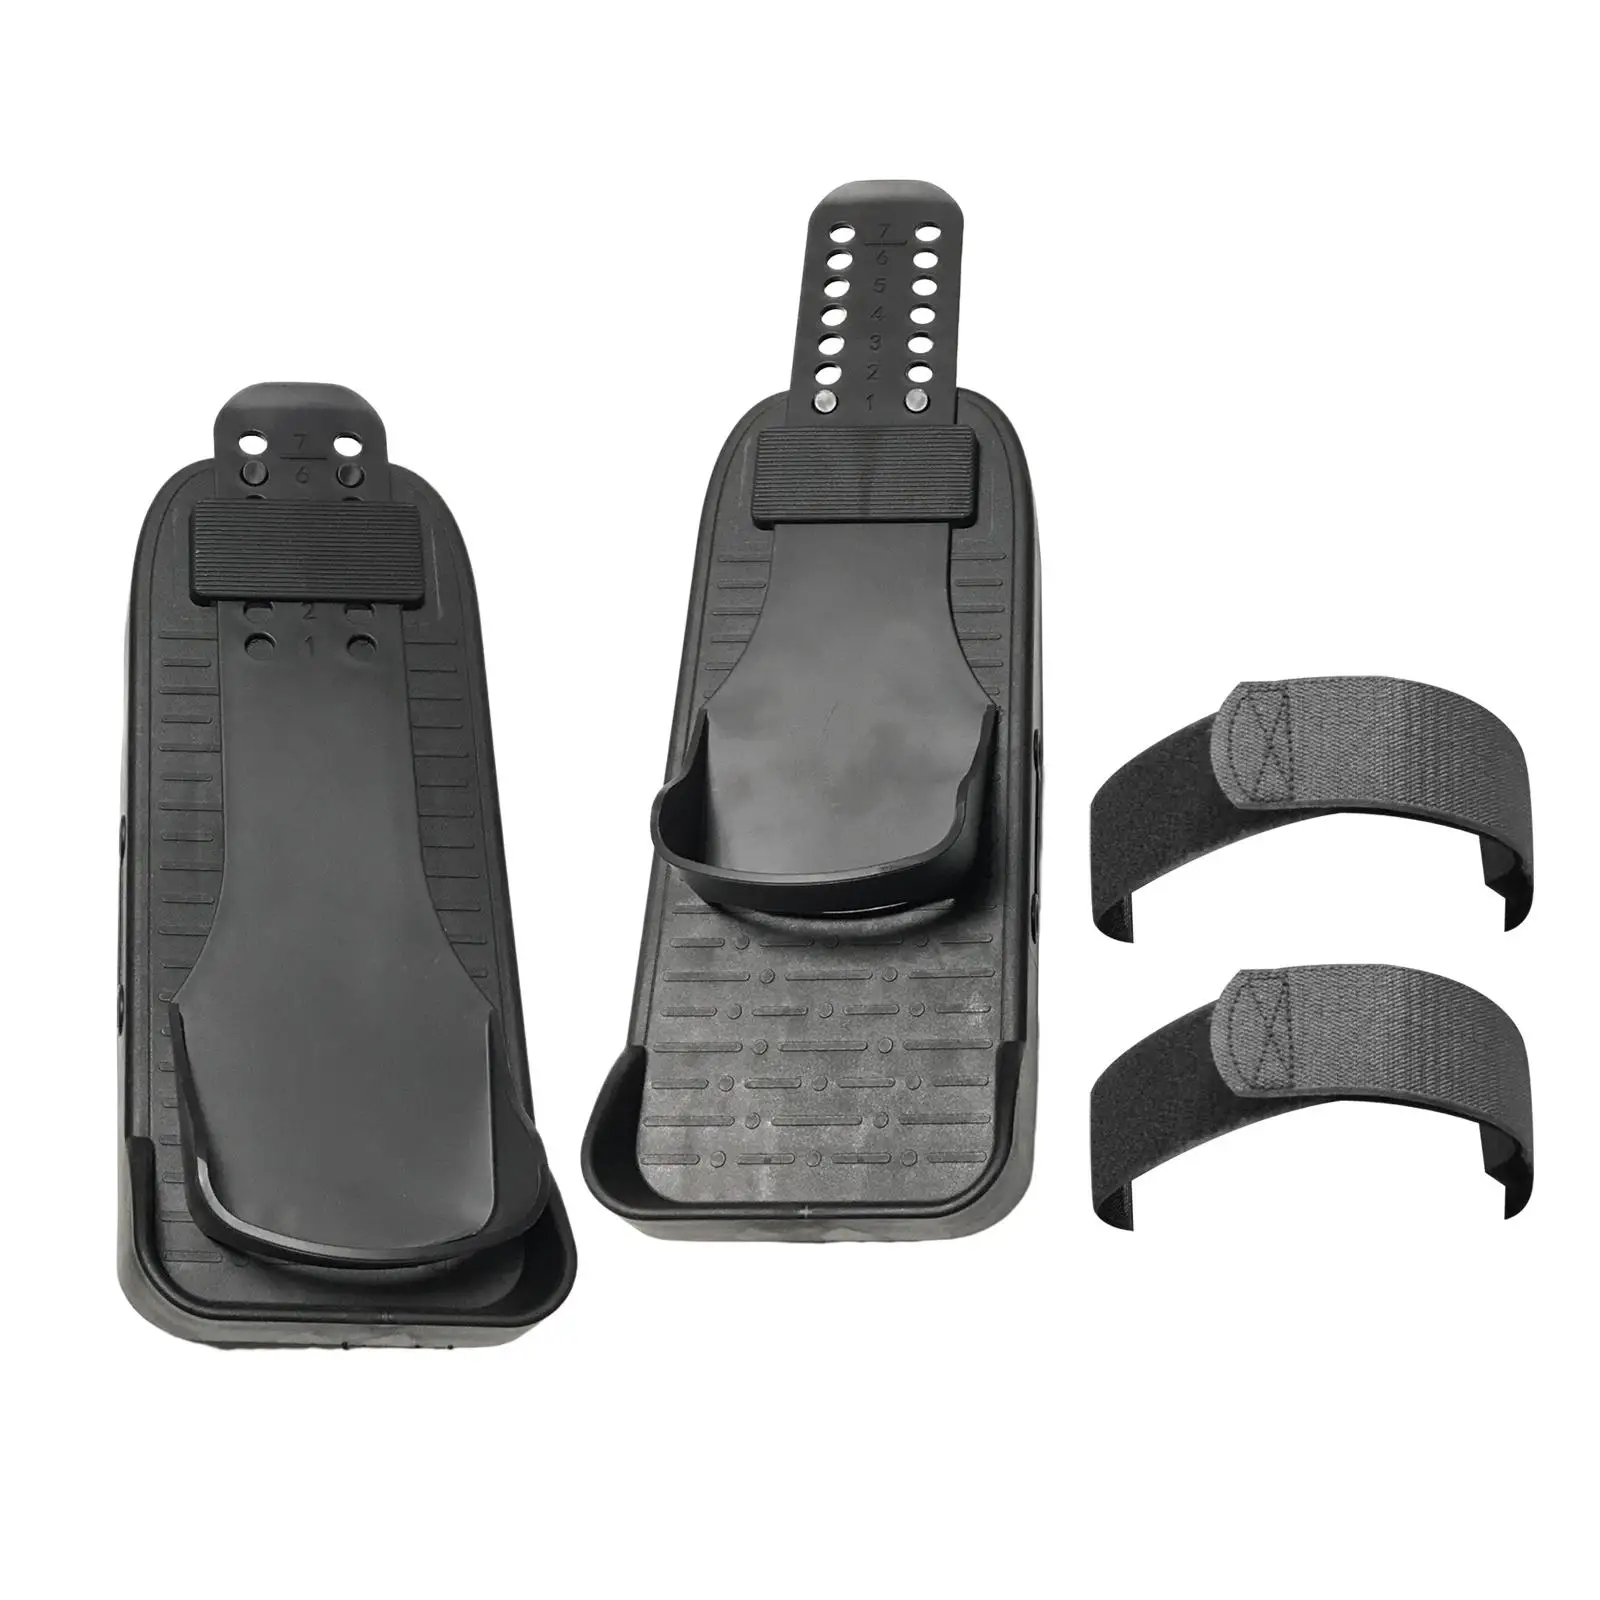 Rowing Machine Replacement Foot Pedals with Straps for Walking Machine Parts